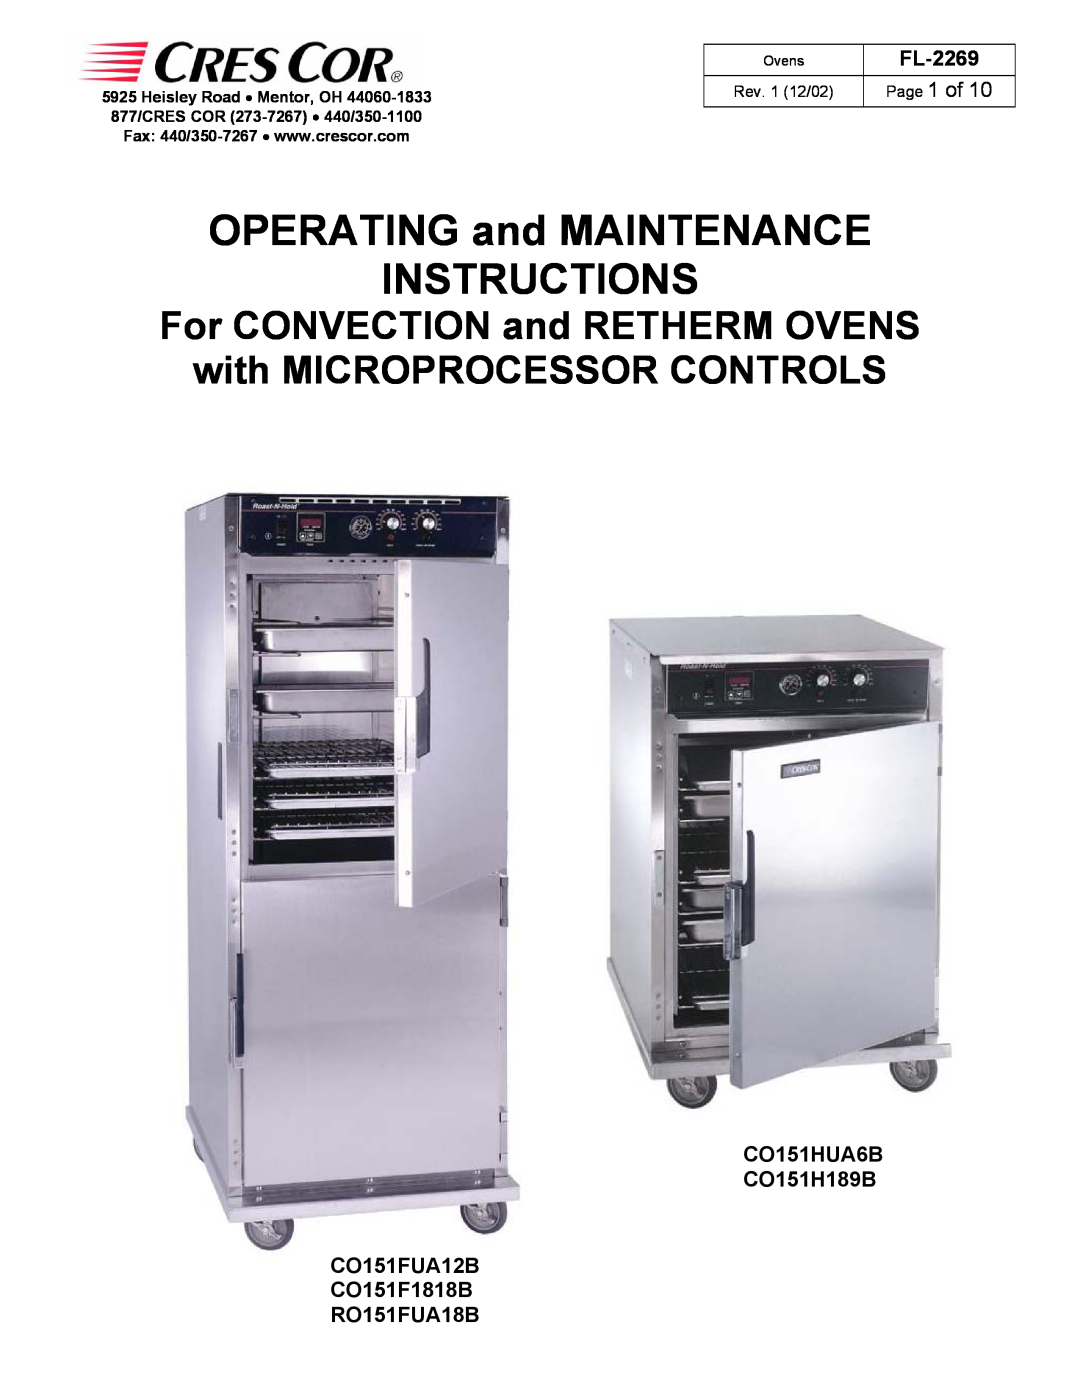 Cres Cor CO151H189B manual OPERATING and MAINTENANCE INSTRUCTIONS, FL-2269, Page 1 of, RO151FUA18B, Rev. 1 12/02, Ovens 